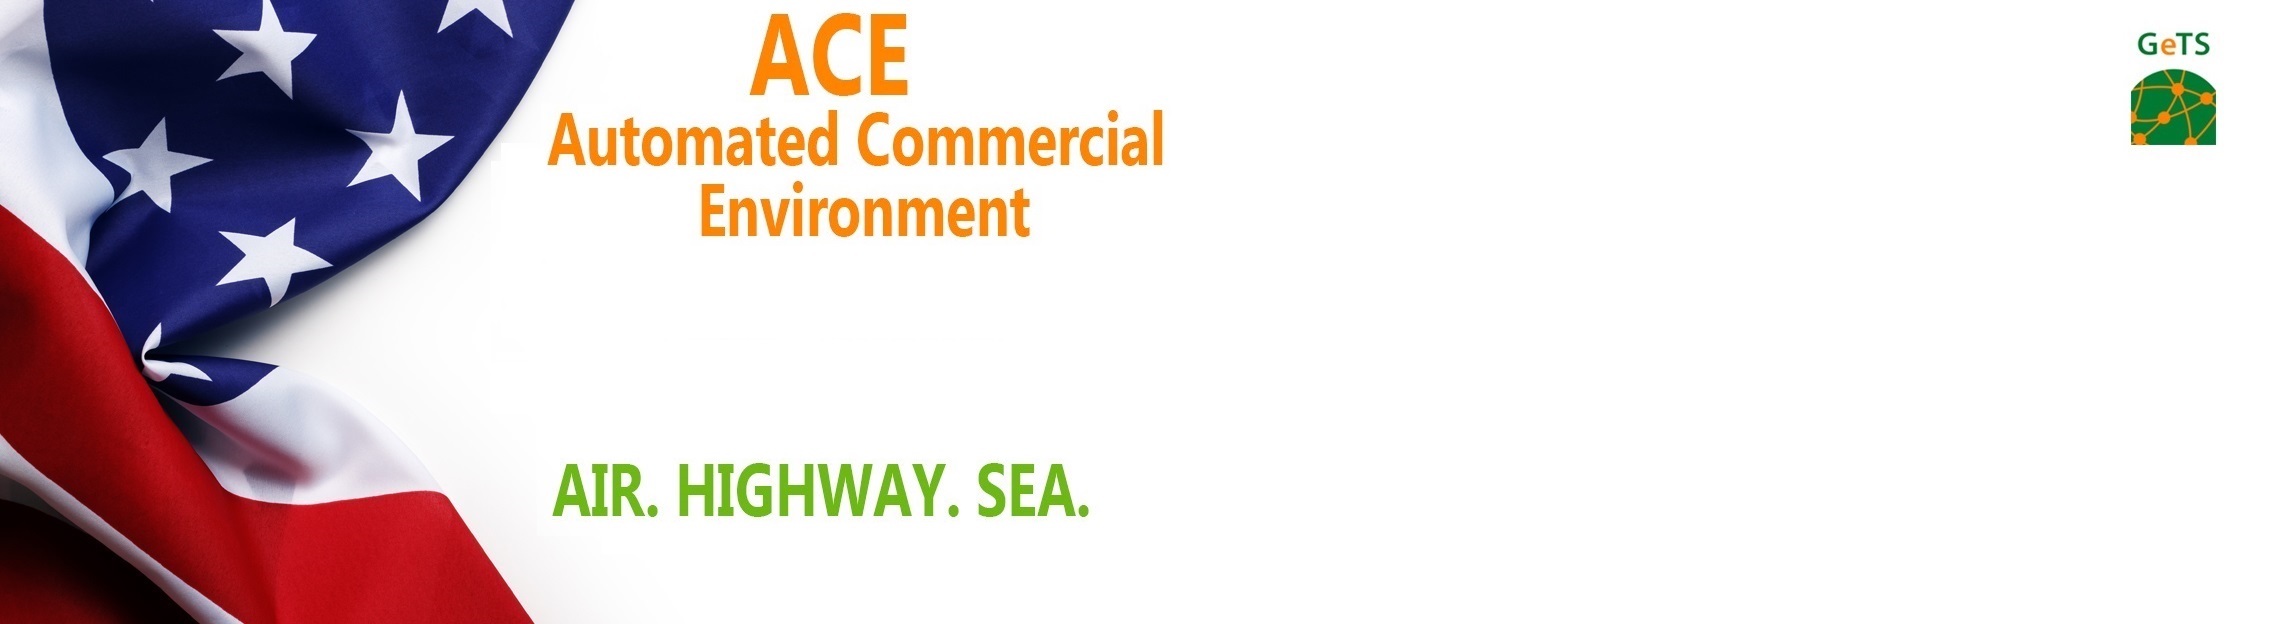 ACE (Automated Commercial Environment)